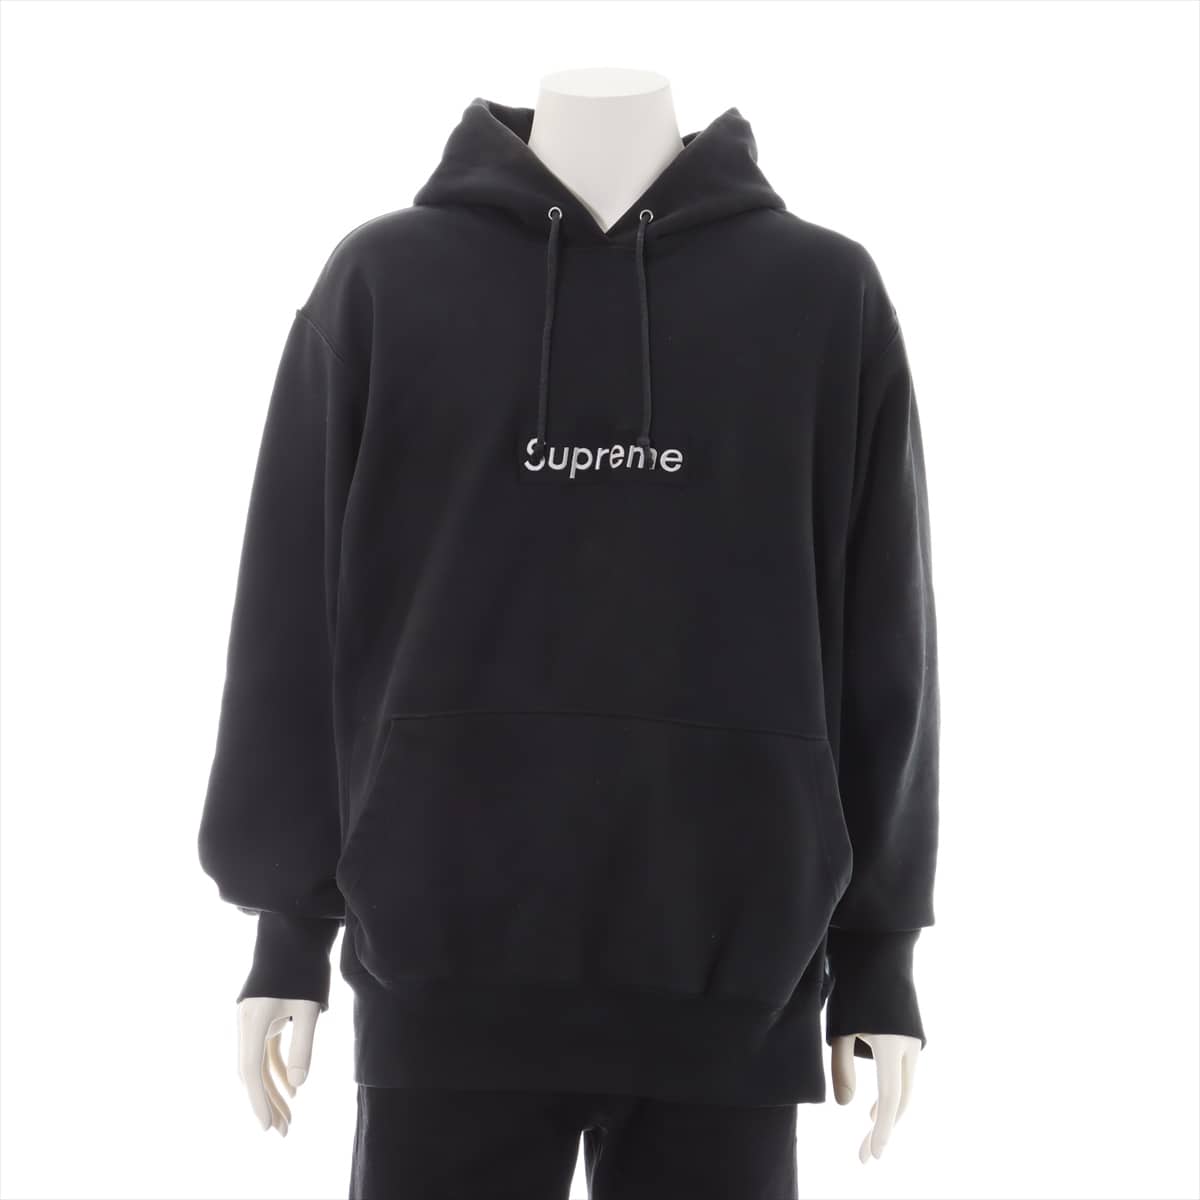 Supreme Cotton Parker XL Men's Black  Box Logo USA The color is faded and there are stains